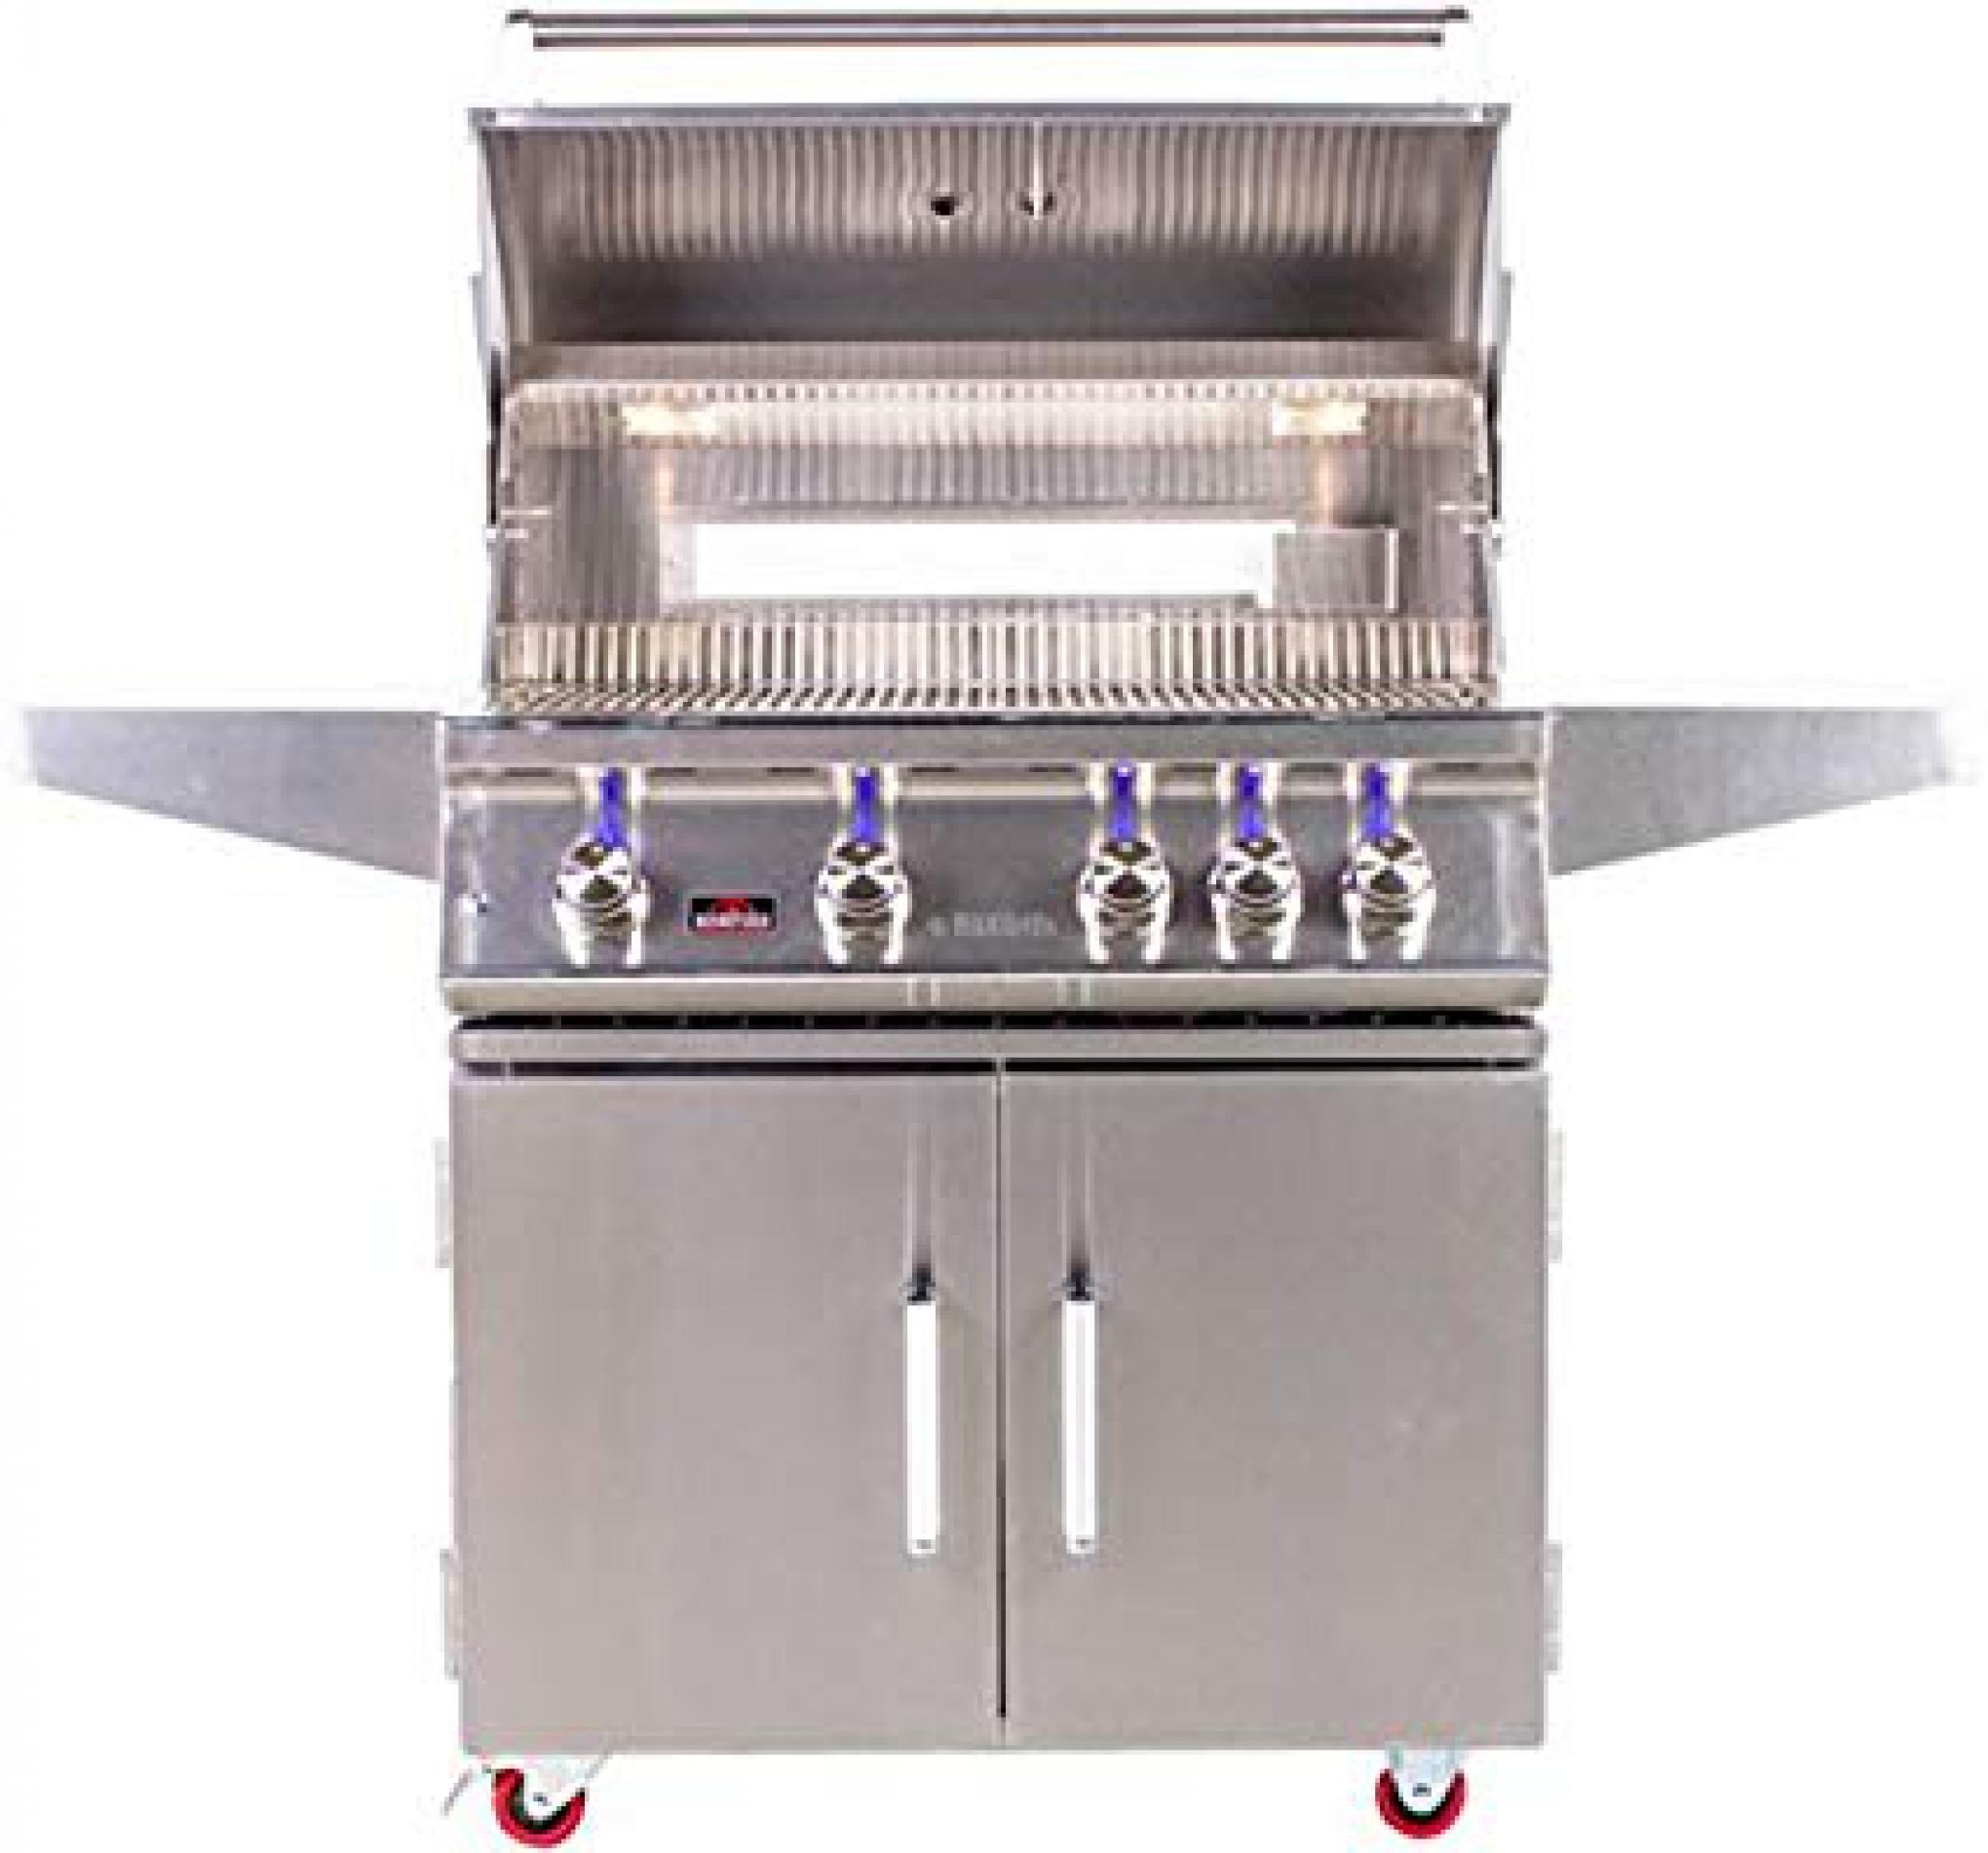 Bonfire 34" Premium Propane Grill on a Cart, Stainless Steel